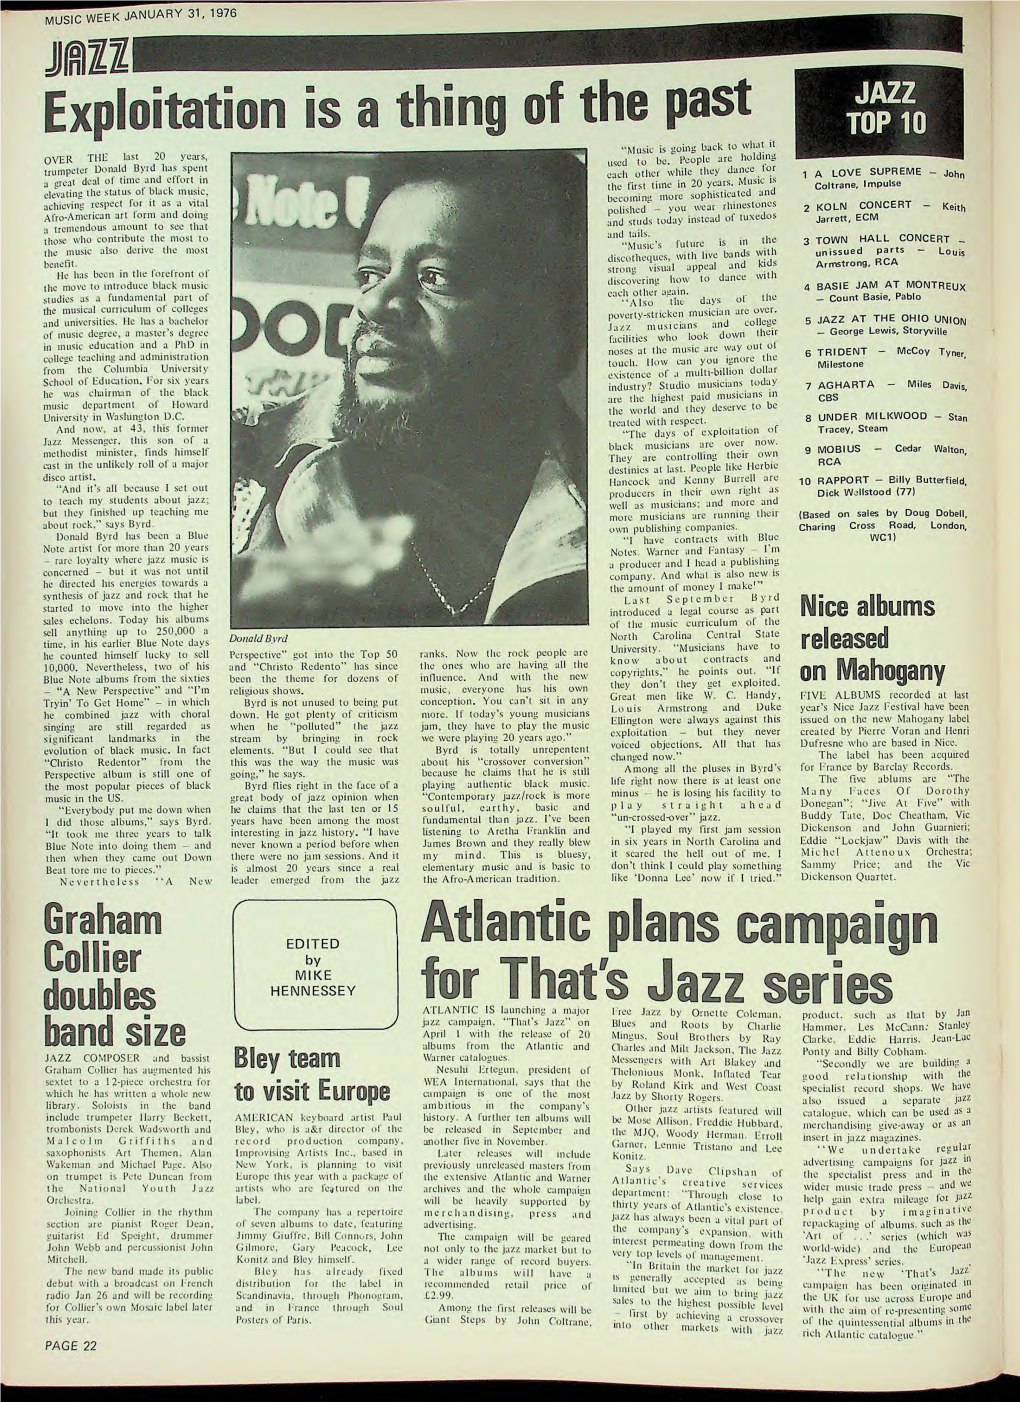 MUSIC WEEK JANUARY 31, 1976 0 N Exploitation Si a Thing JAZZ TOP